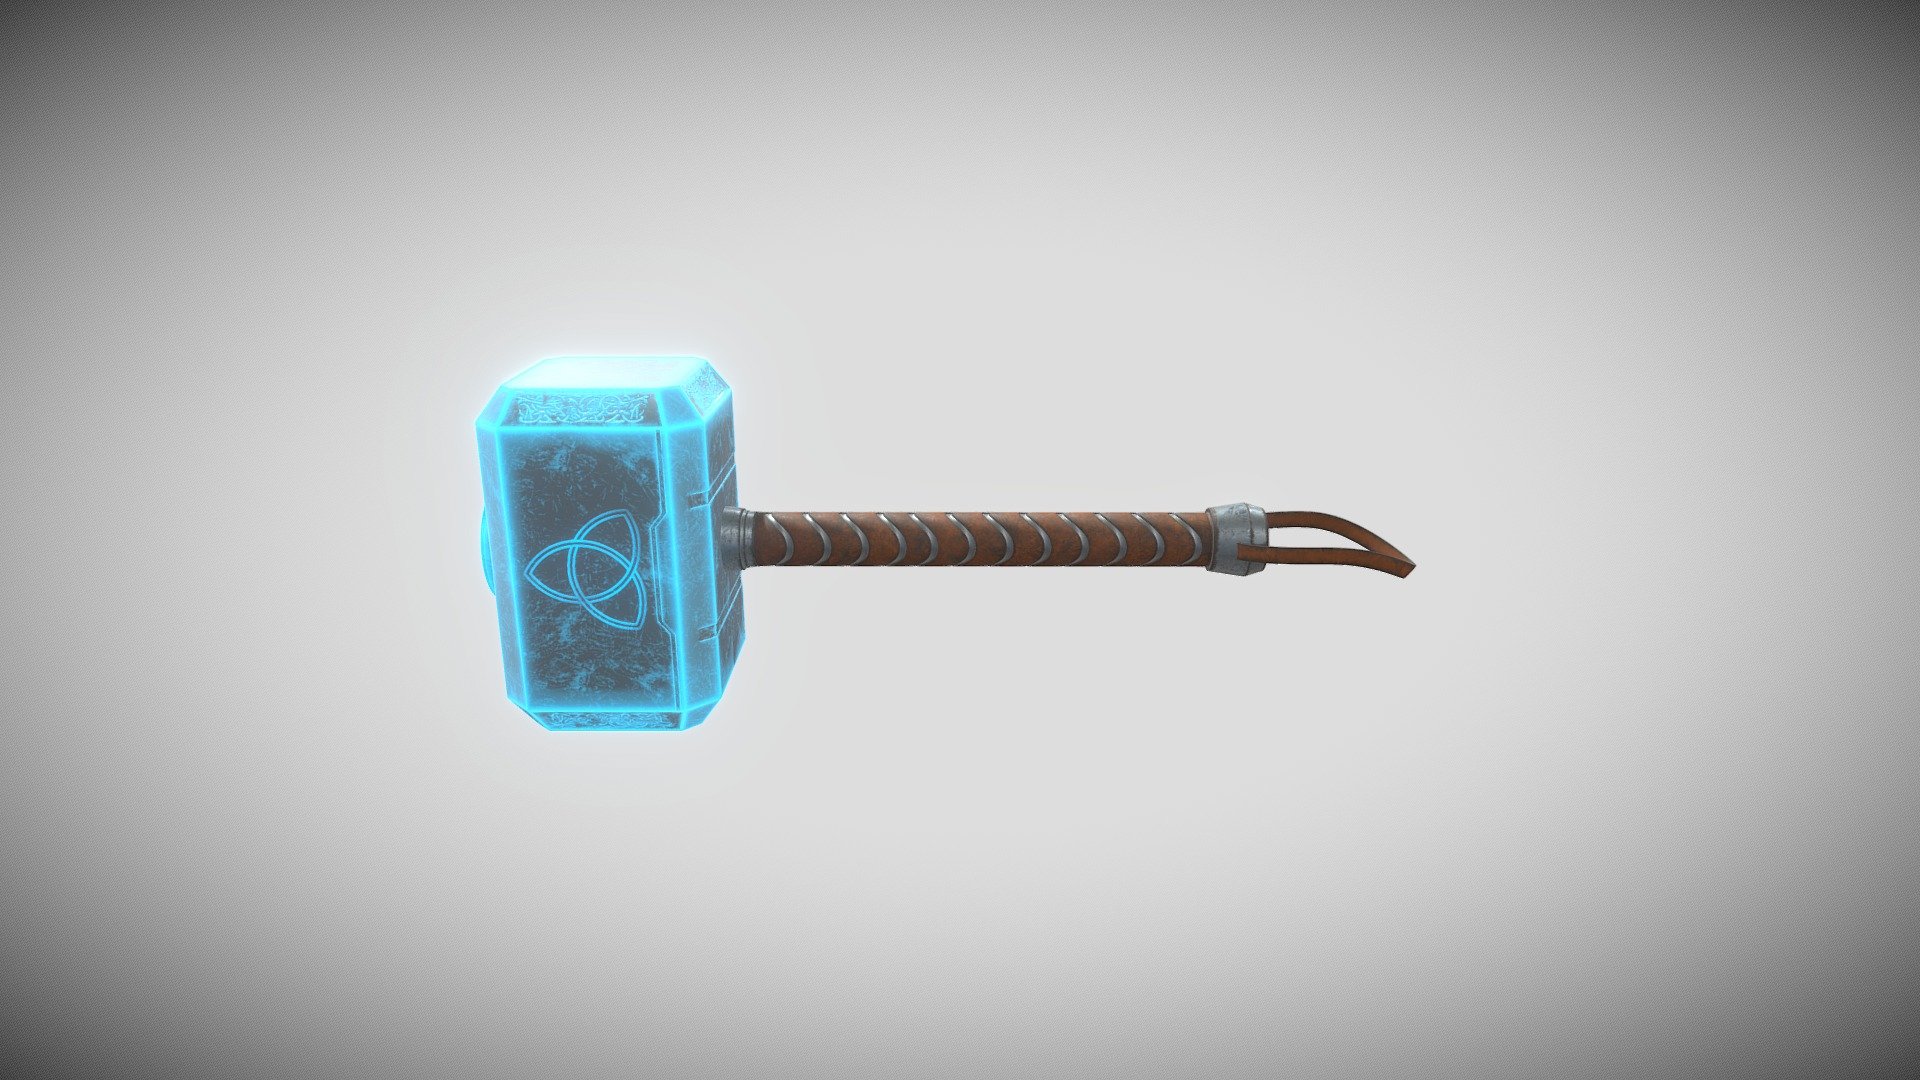 Mjolnir The original weapon of thor, with lightning charged - Thor's Hammer Lightning charged - 3D model by YahyaKassab 3d model